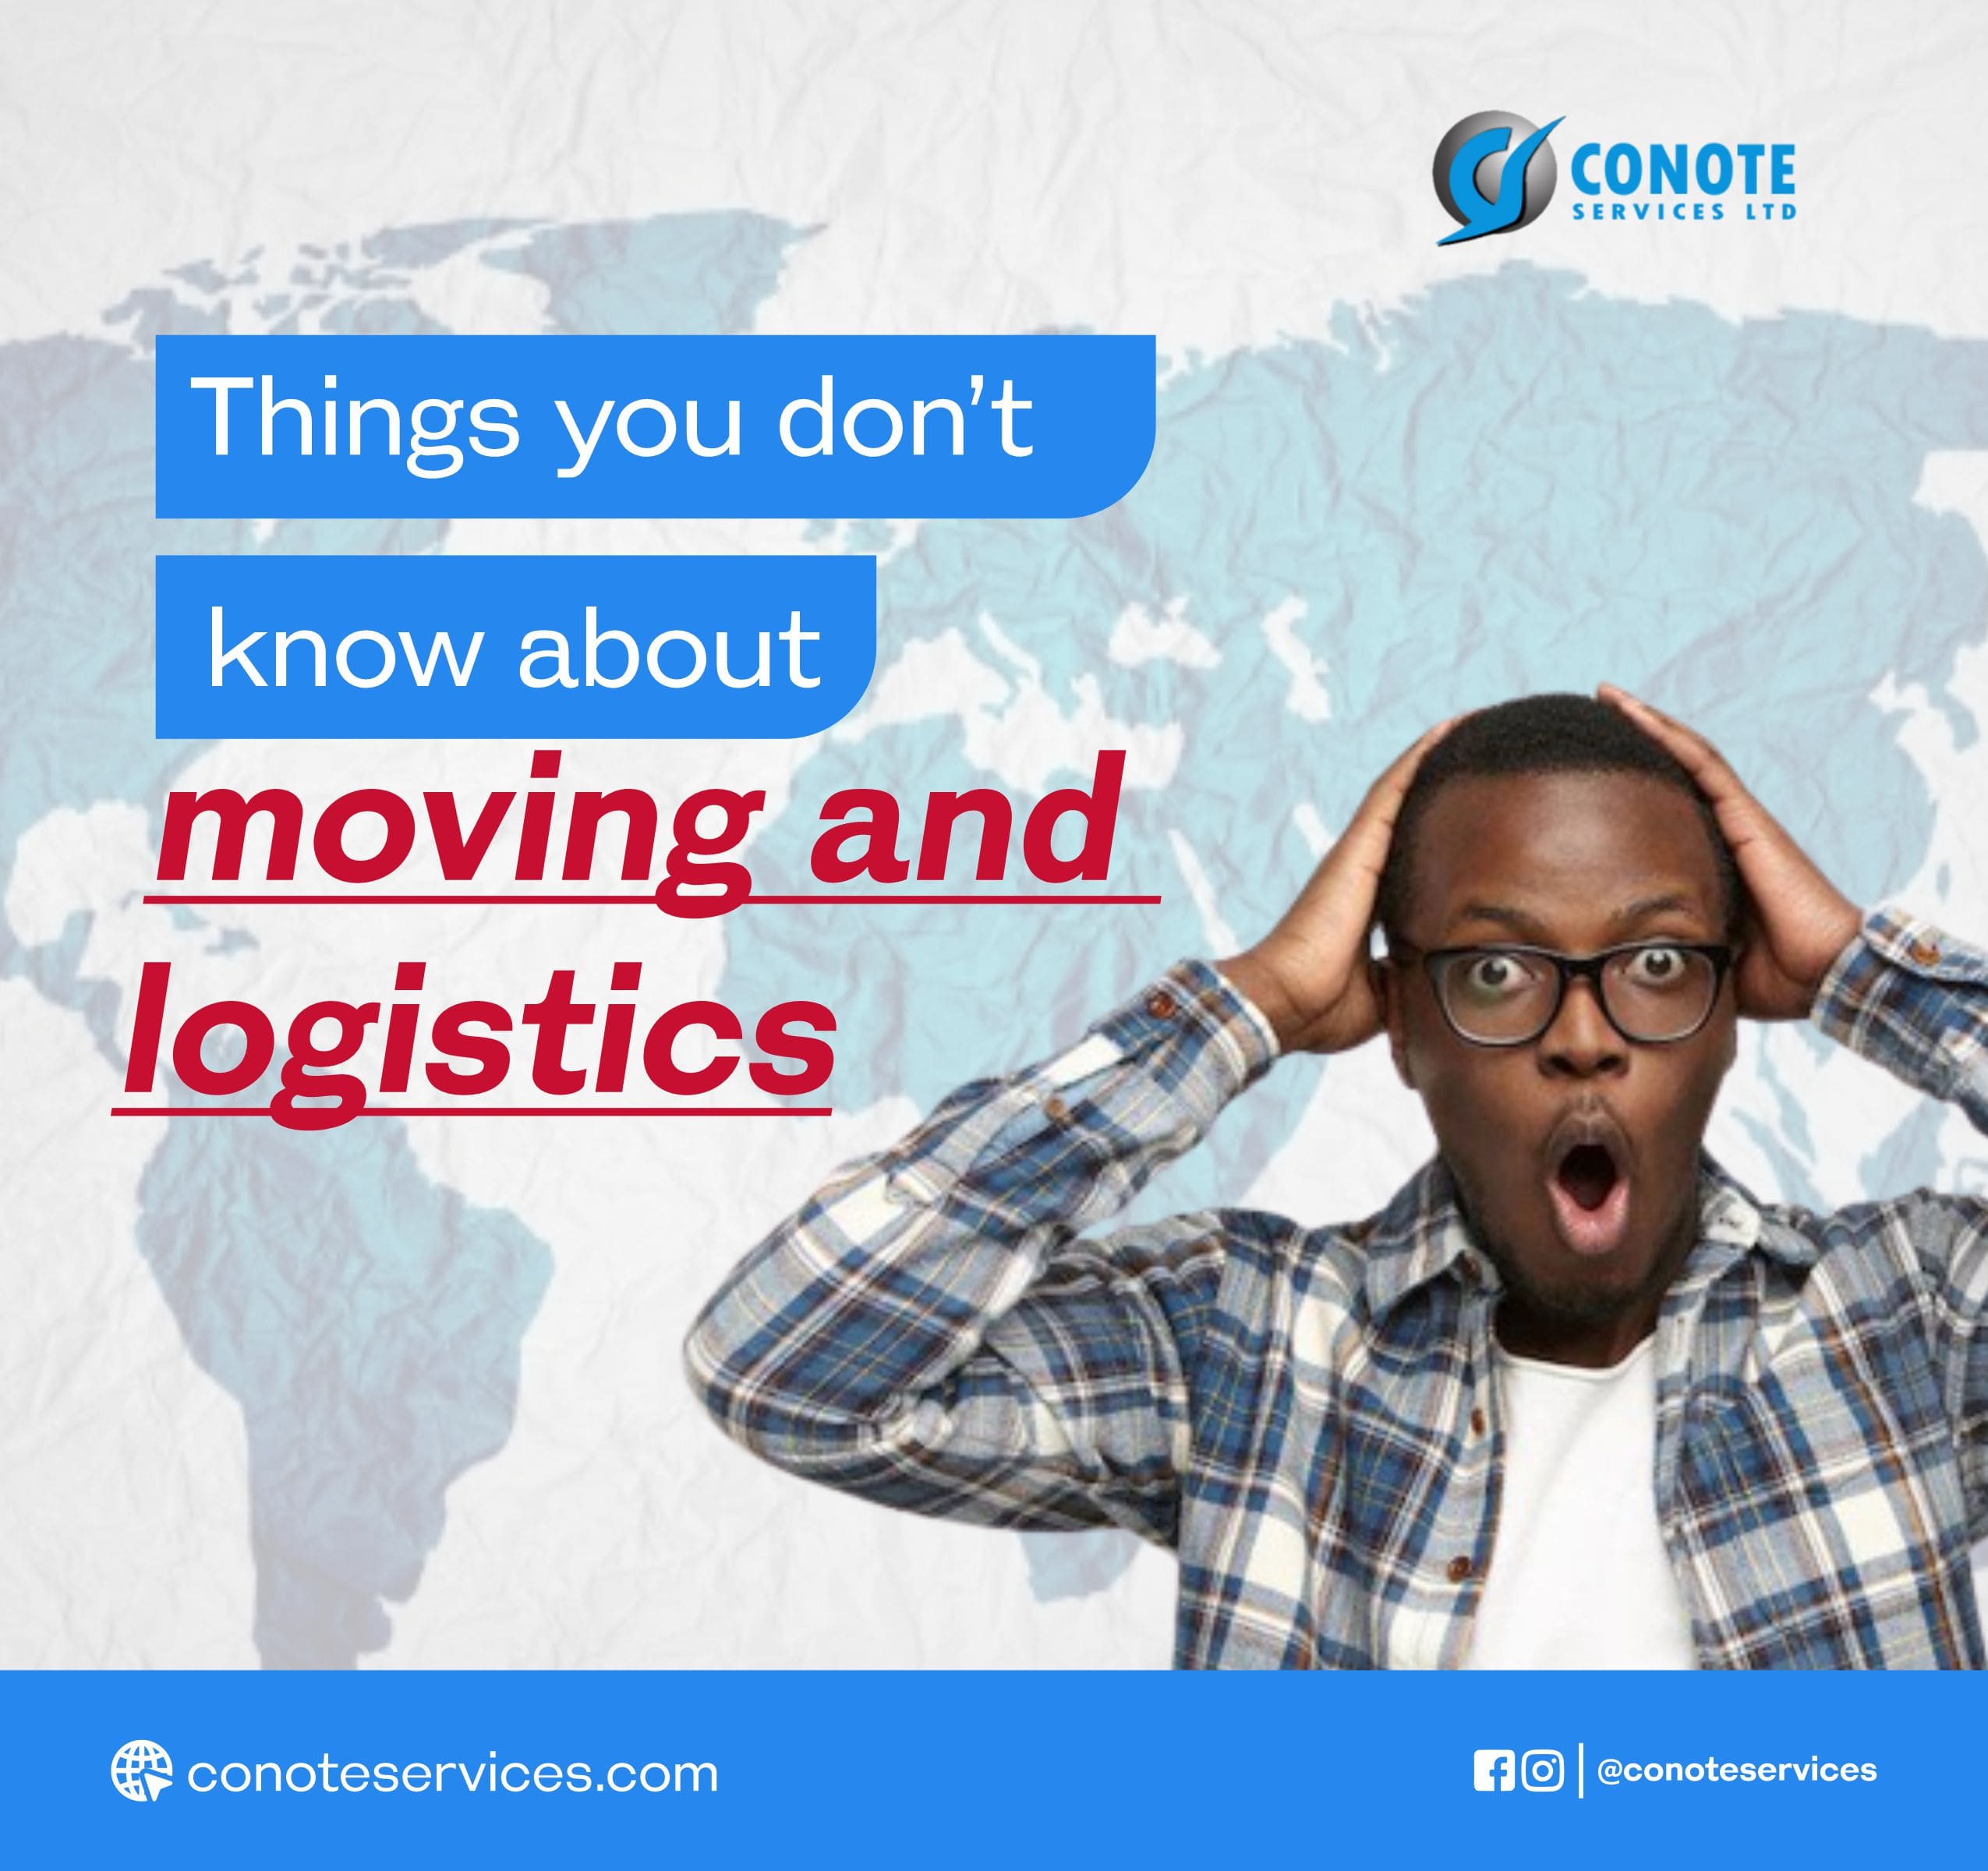 about moving and logistics